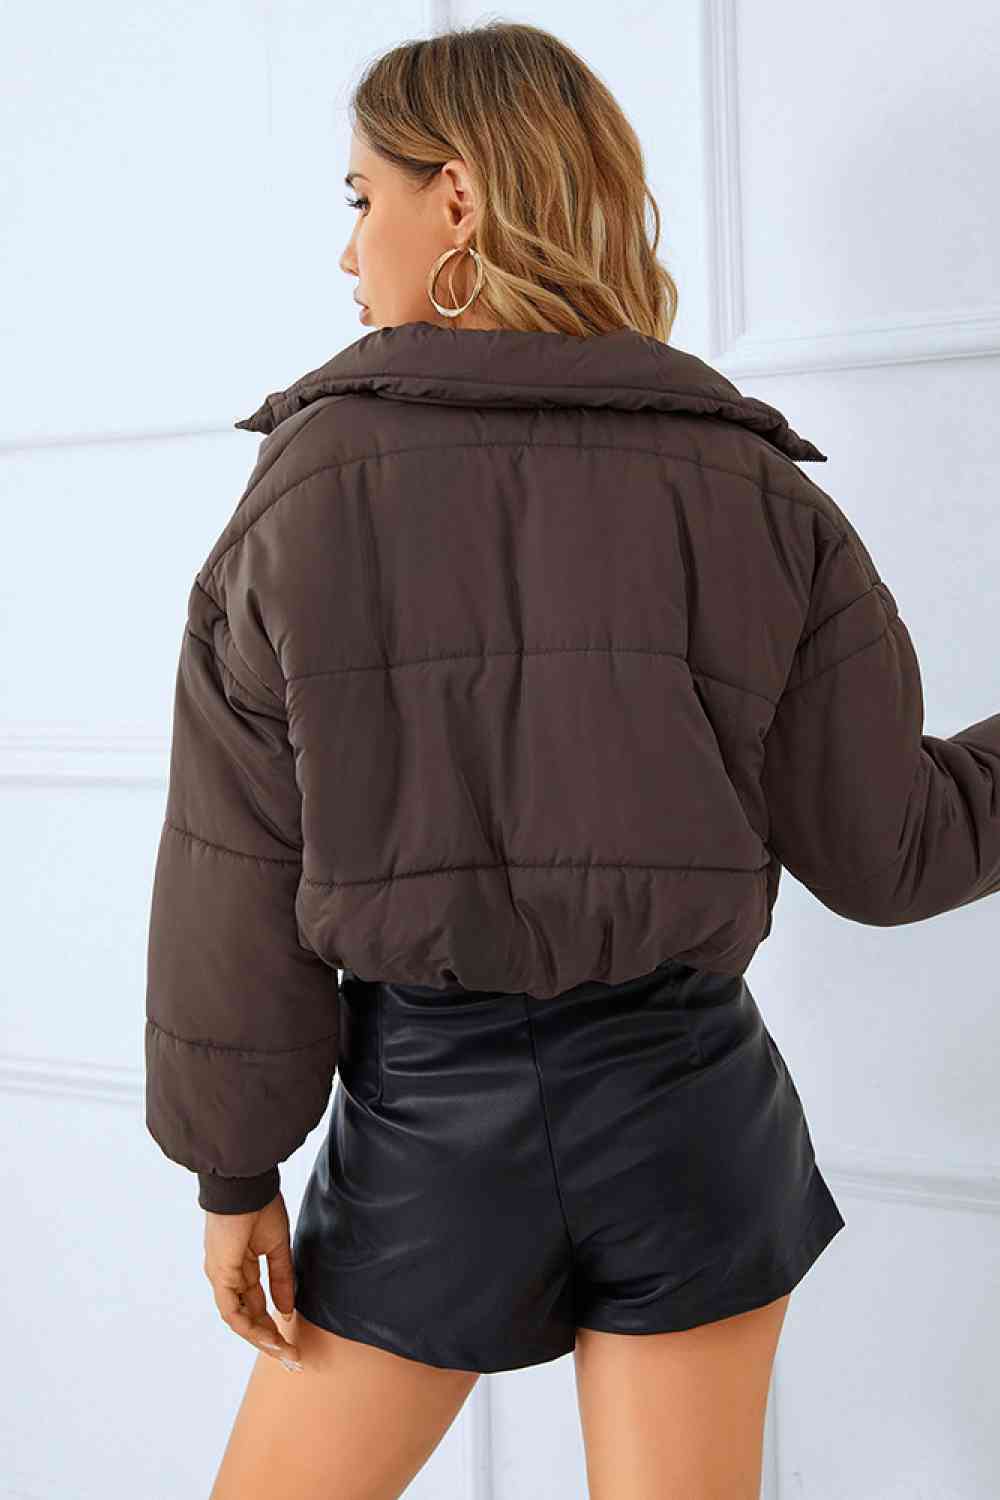 a warm and stylish winter coat in a rich, deep shade of navy blue. The coat features a faux fur-lined hood, zippered front, and ample pockets for added convenience. Perfect for staying cozy and fashionable during the cold winter months.A winter coat designed for warmth and functionality, featuring multiple spacious pockets for added convenience.